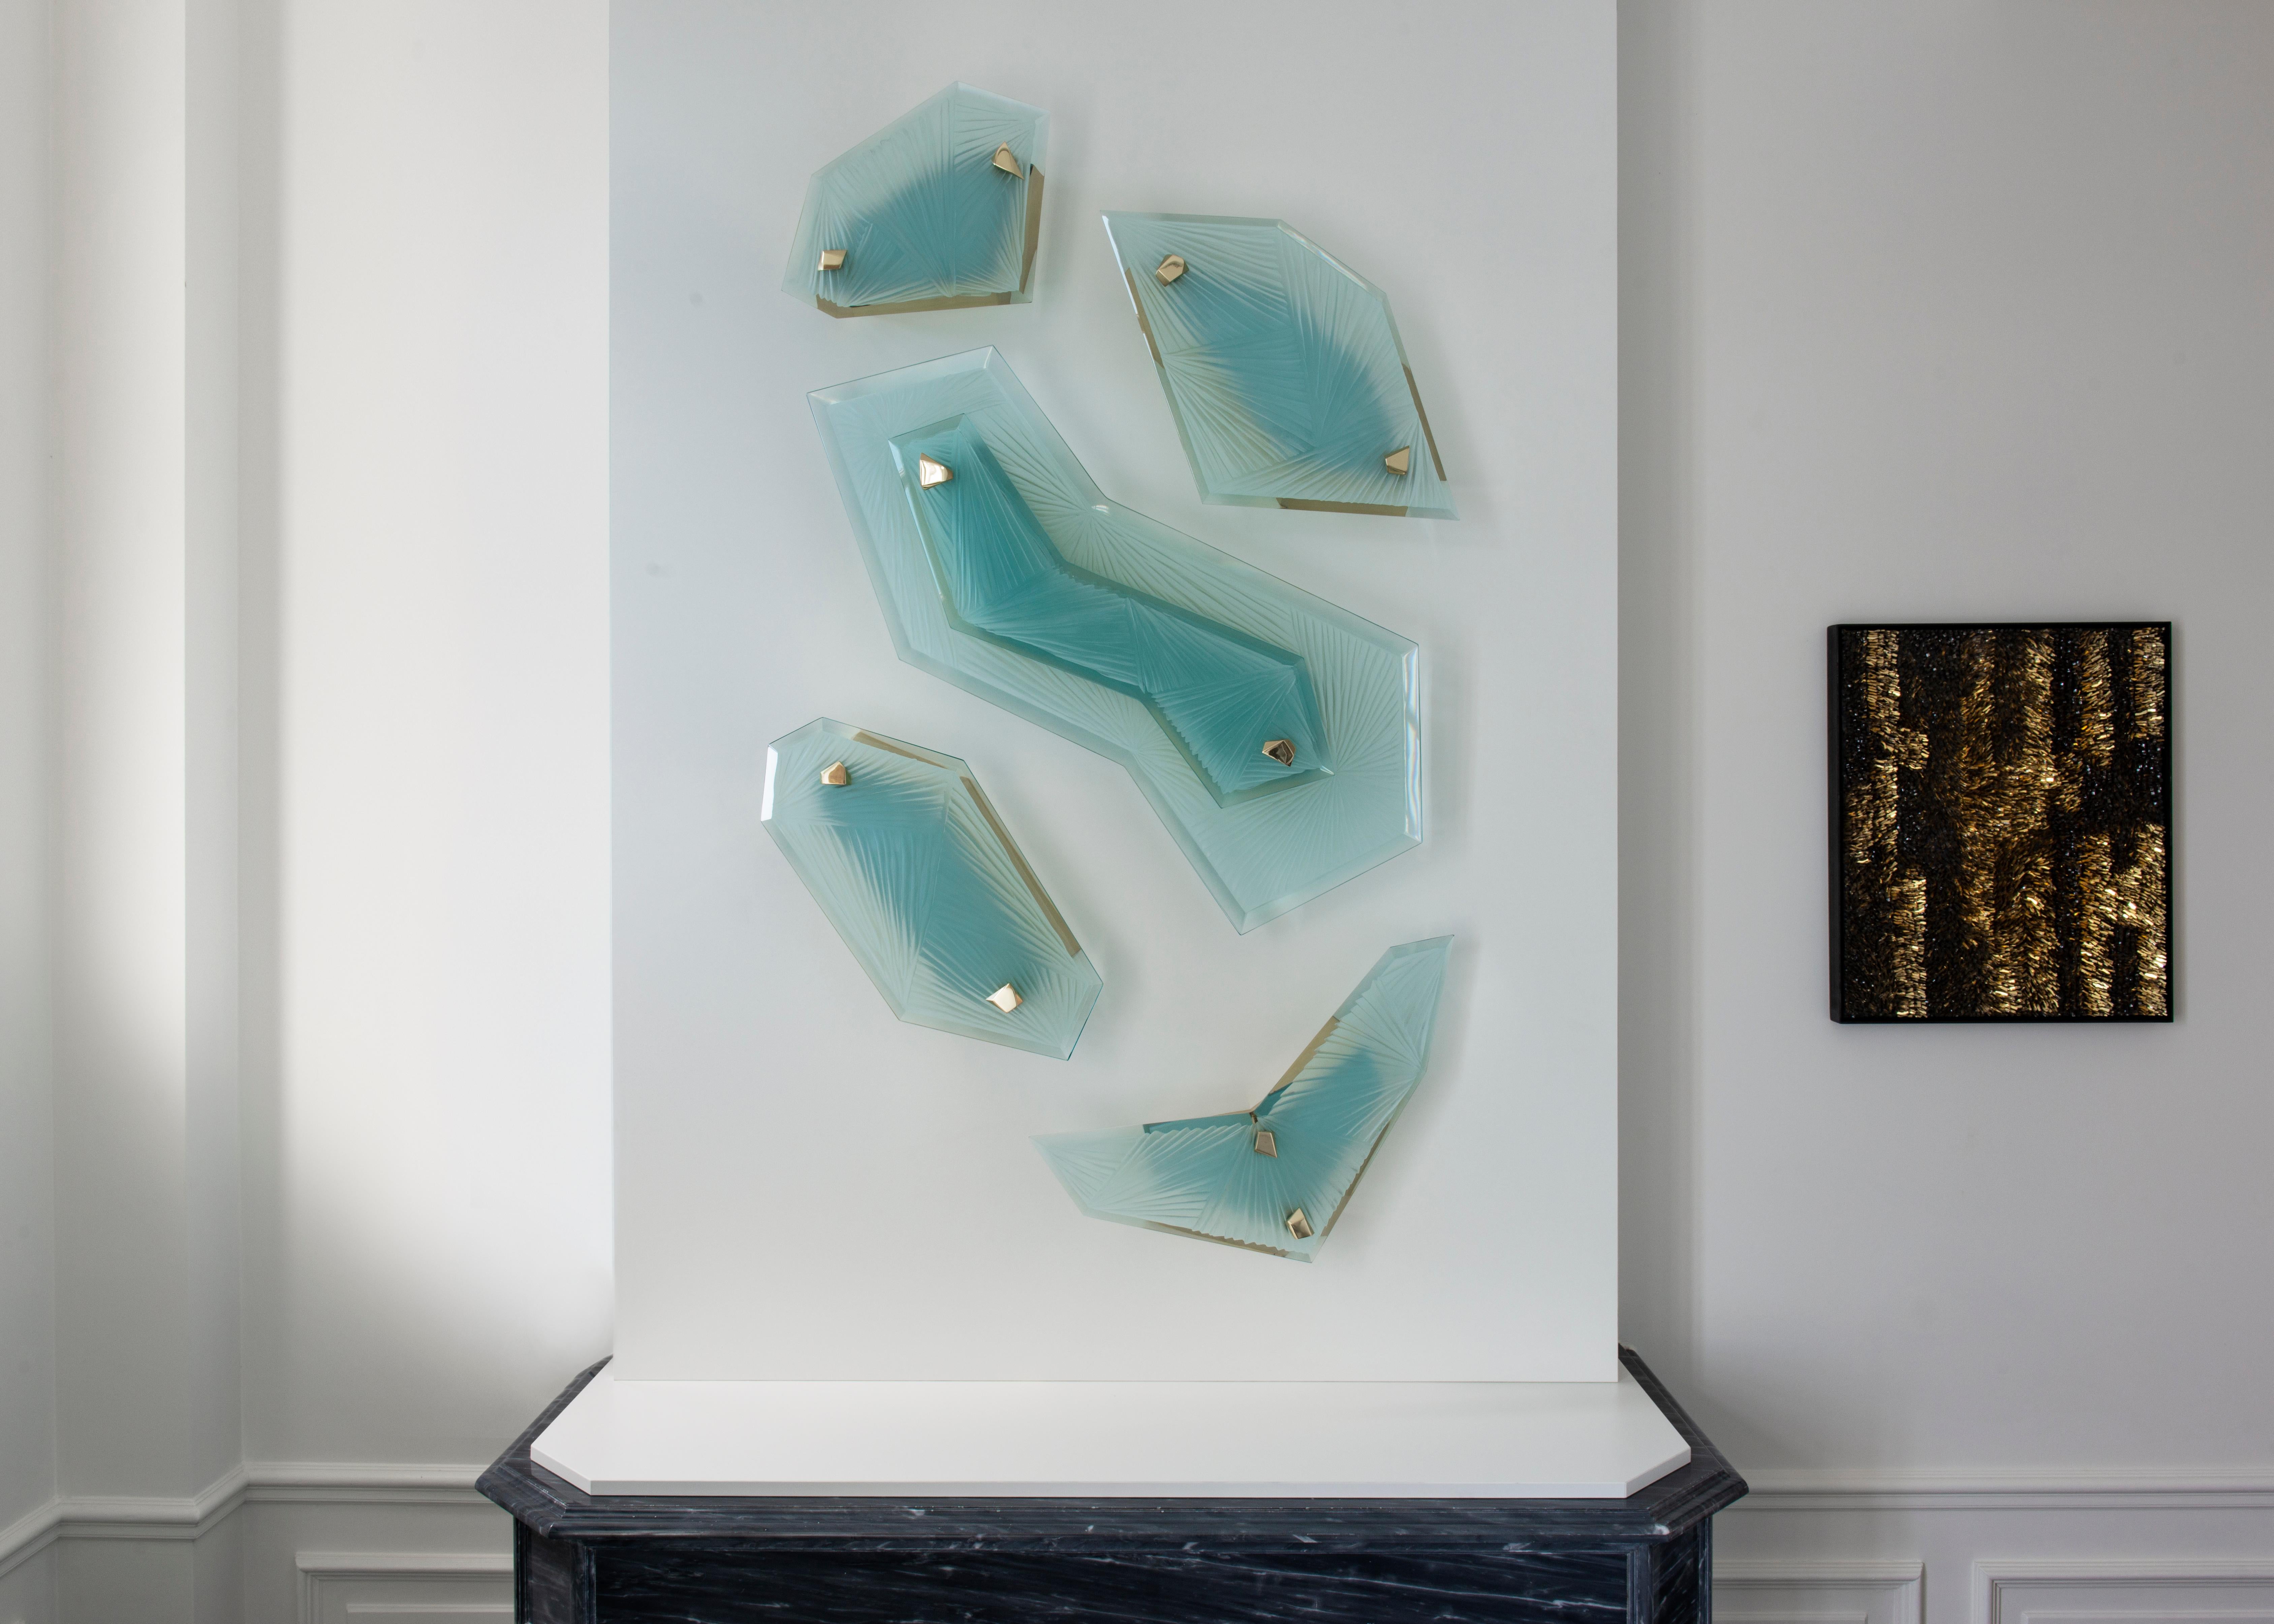 Studio-Made sconces in brass and hand carved glass by Domenico Ghirò as an Edition of 4 + this set as an Artist Proof.